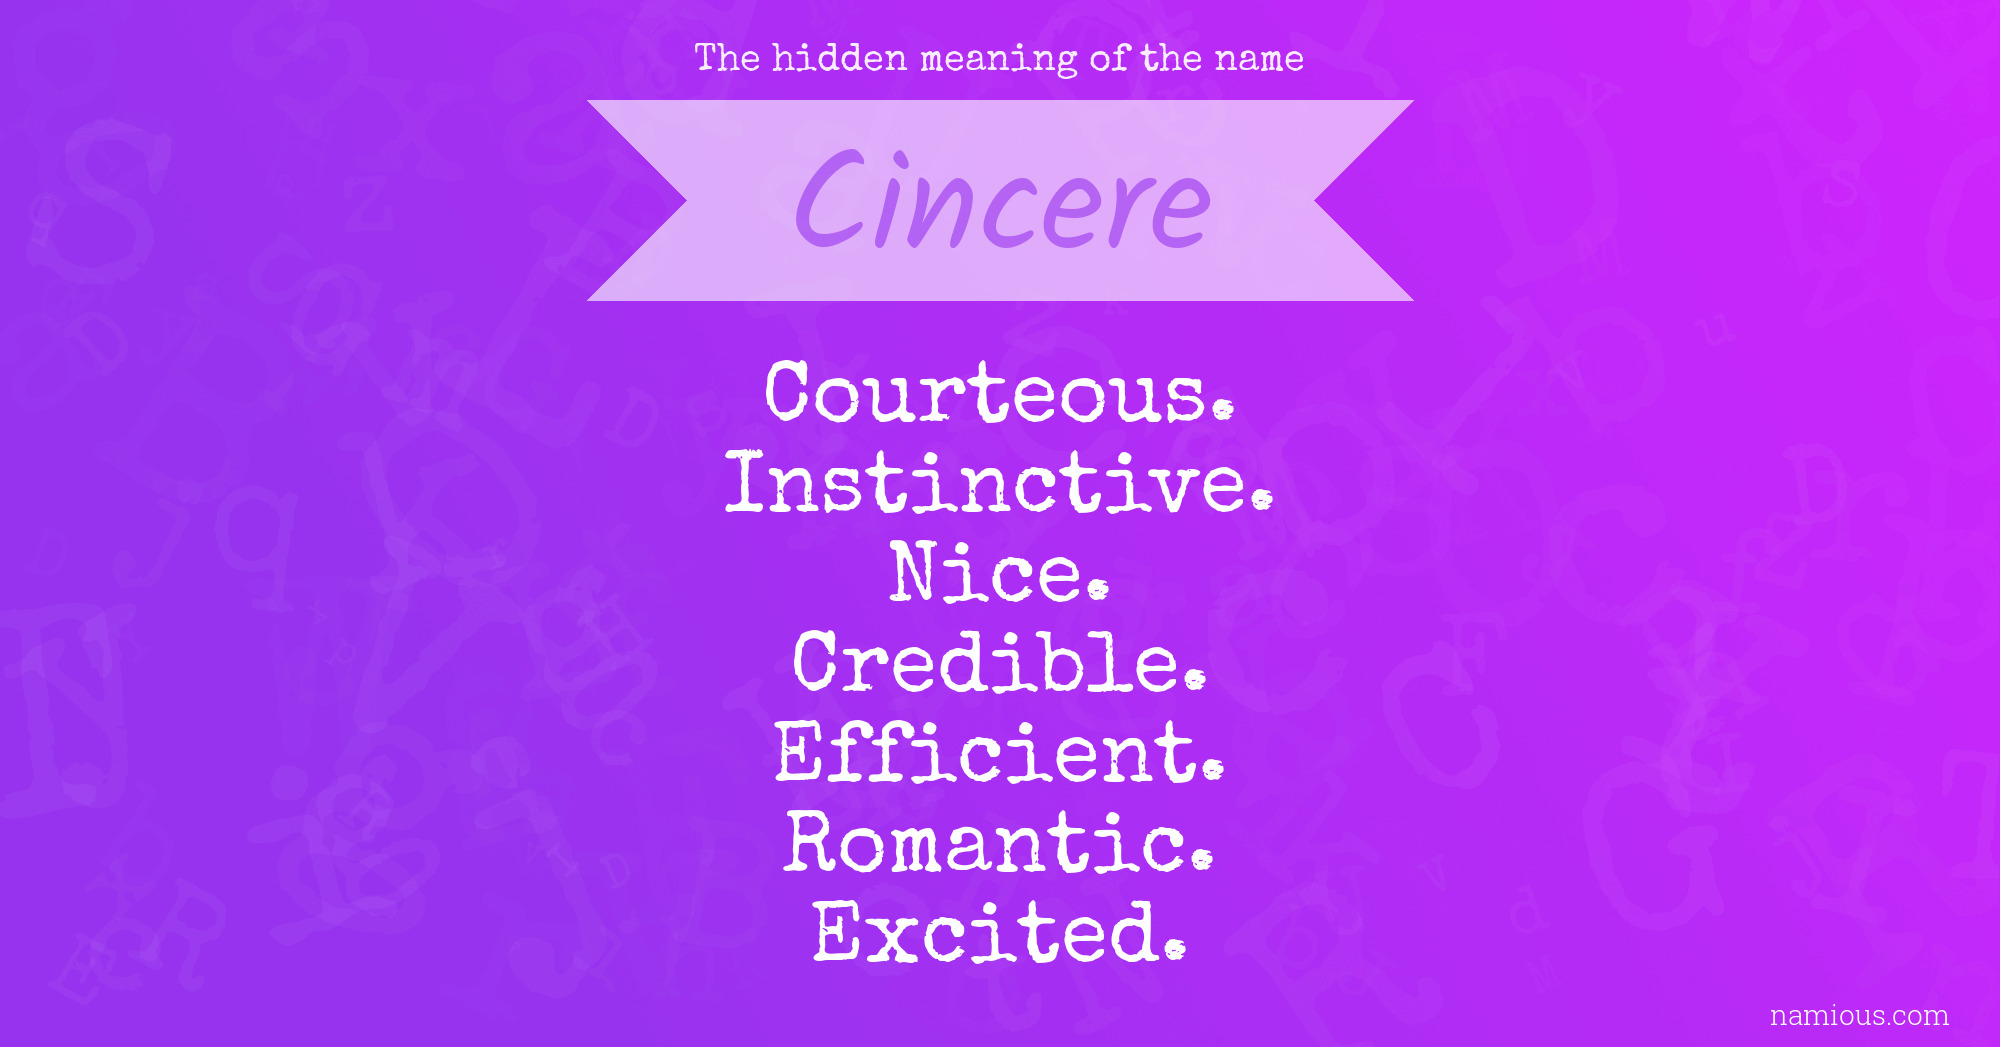 The hidden meaning of the name Cincere